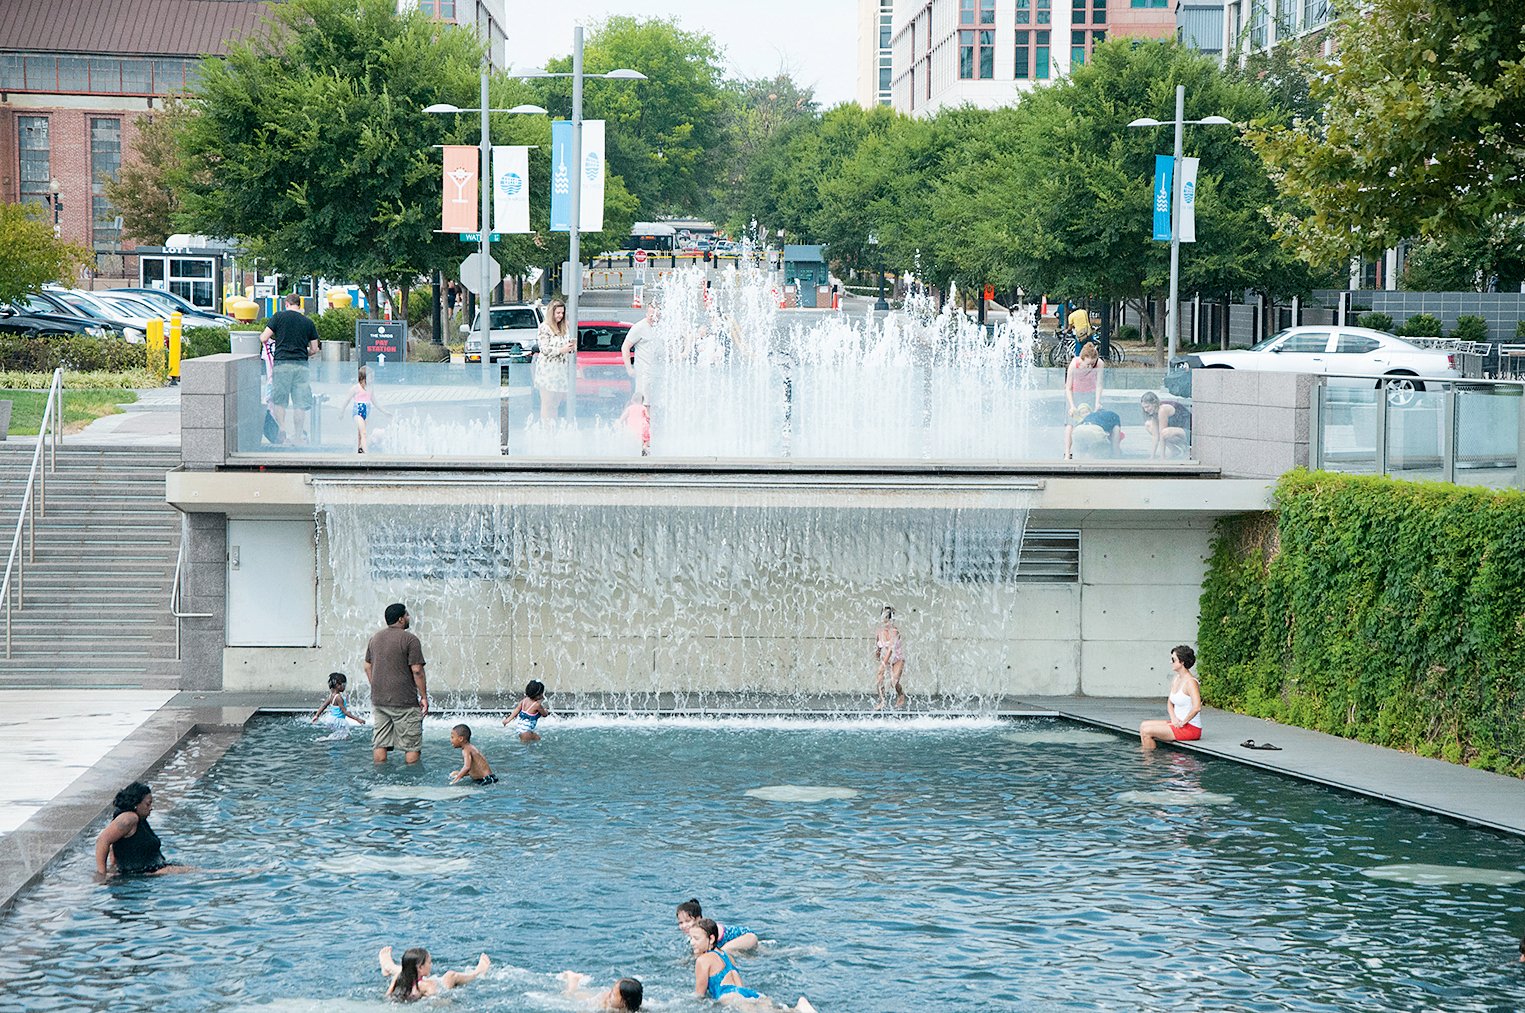 Photograph of Yards Park by Phyllis Peterson/Alamy.